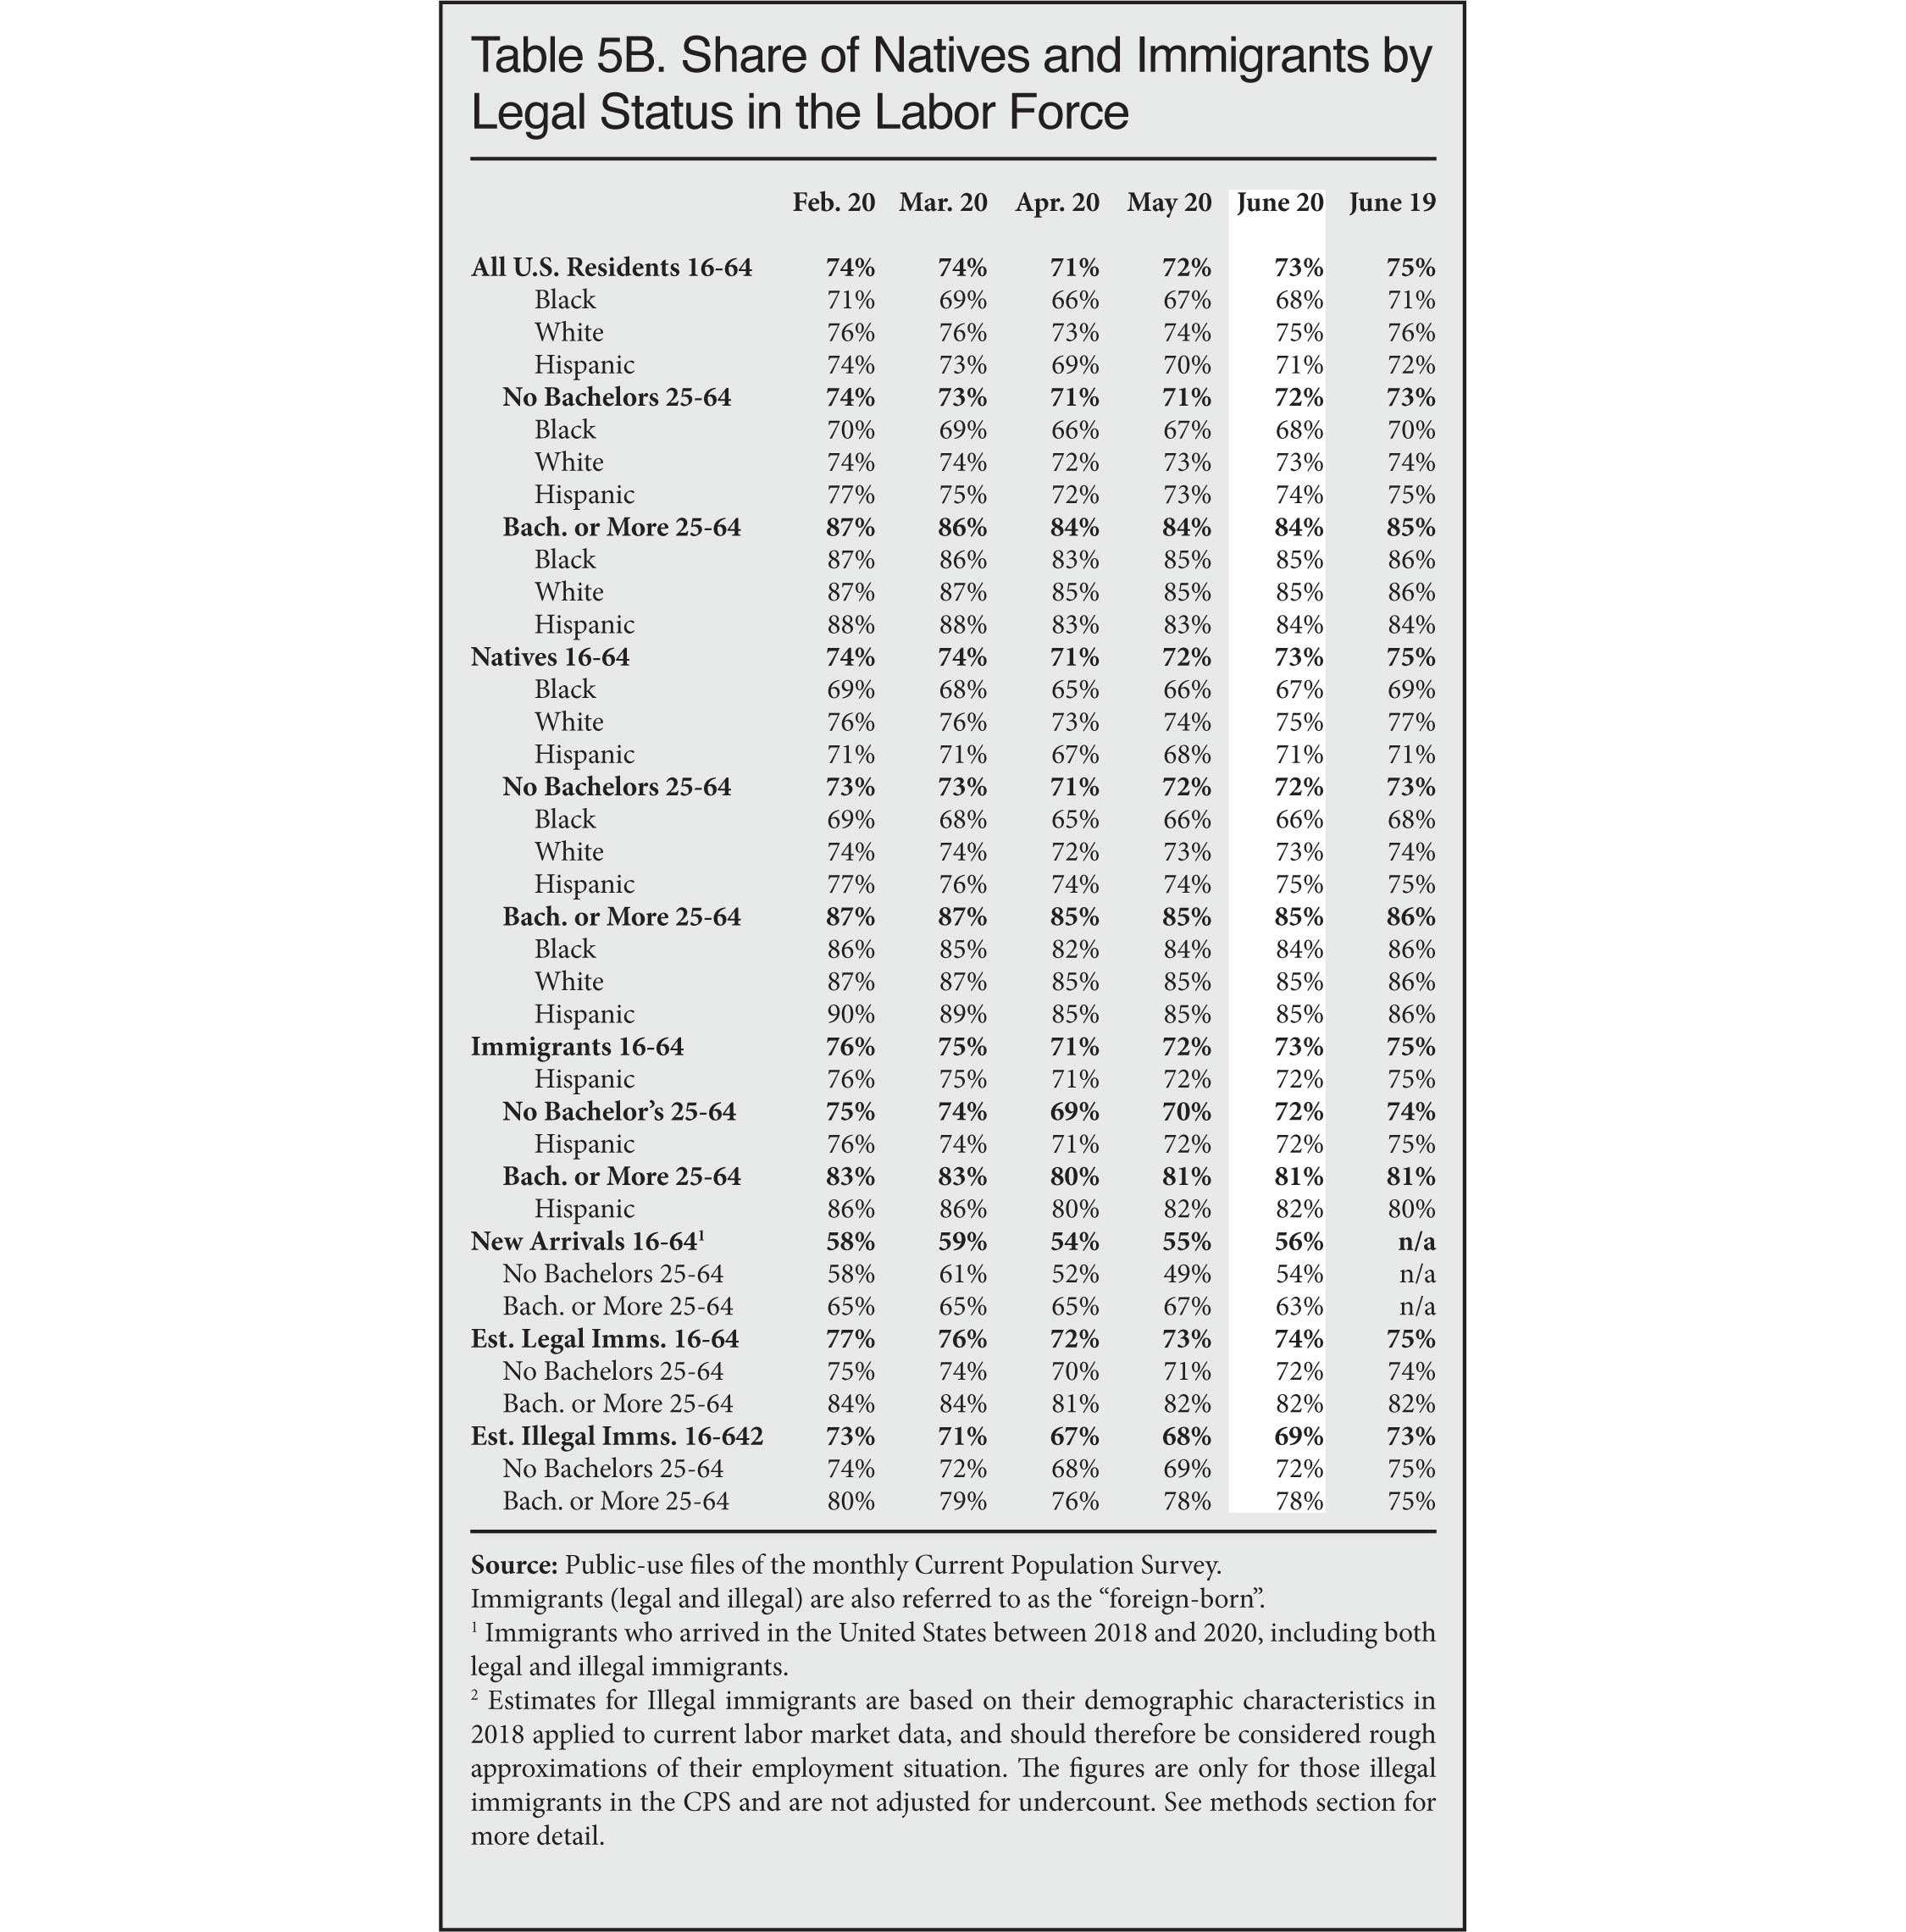 Graph: Share of Natives and Immigrants by Legal Status in the Labor Force